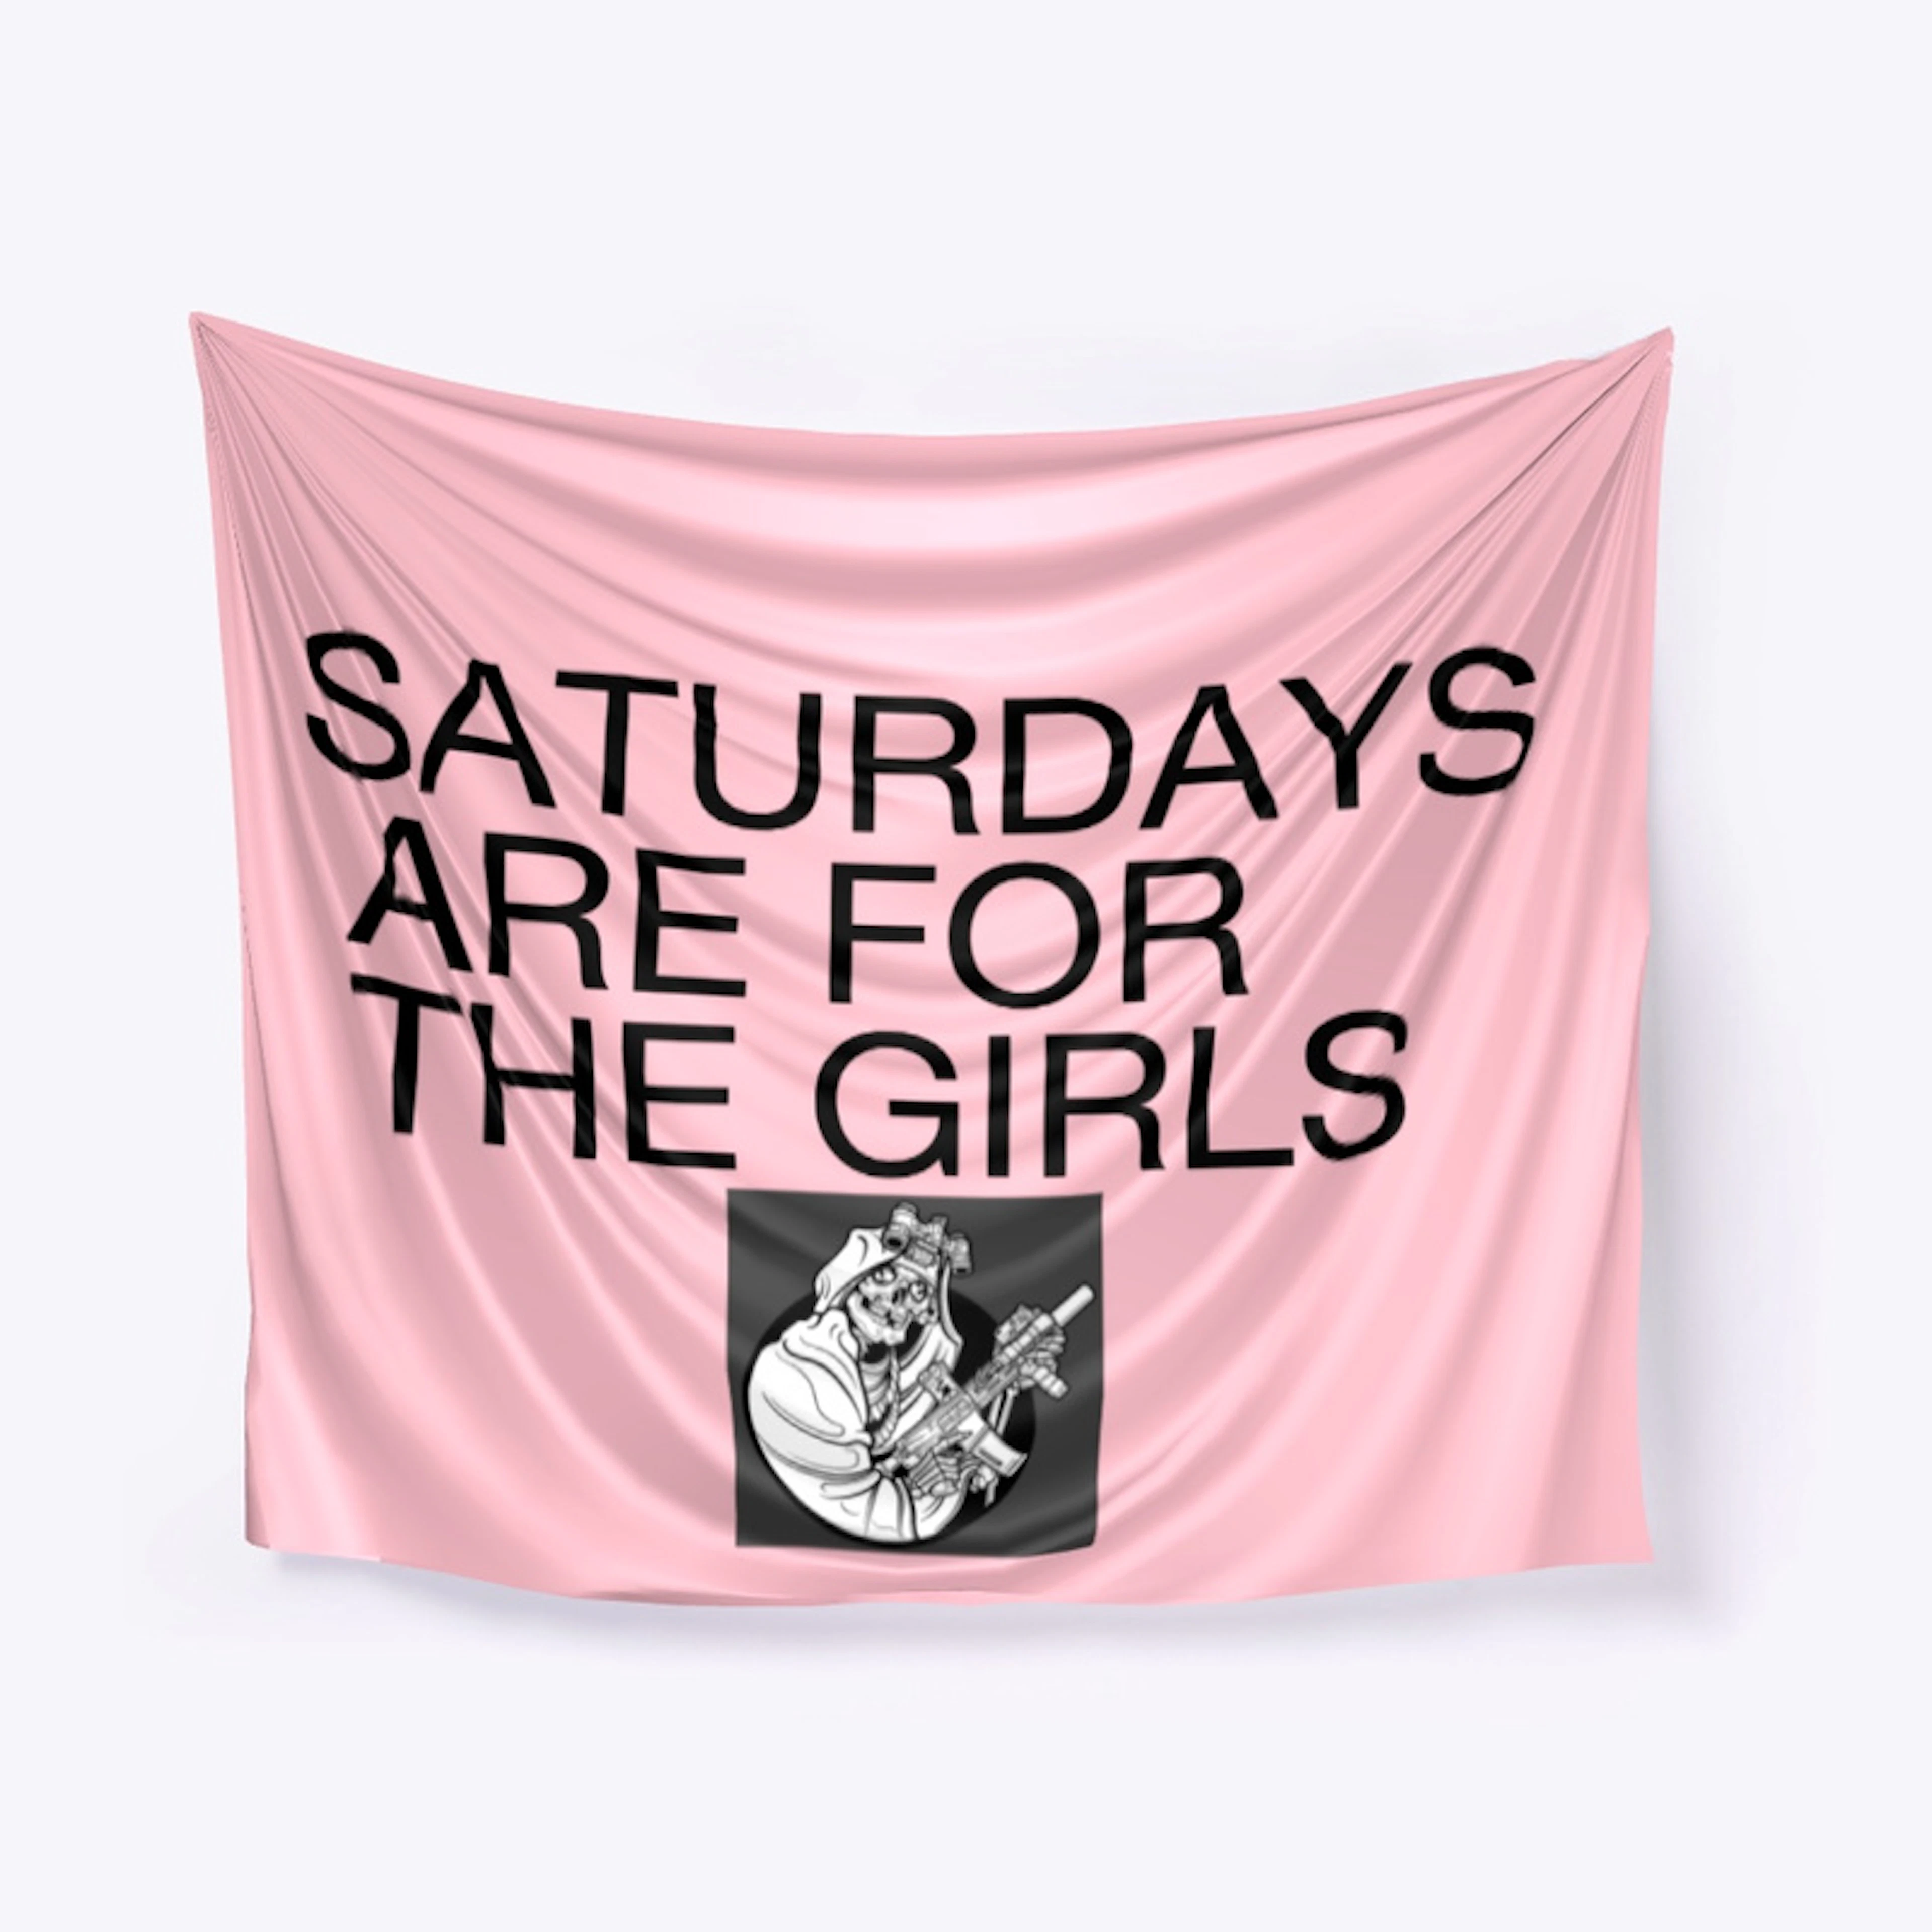 Saturdays Are For The Girls